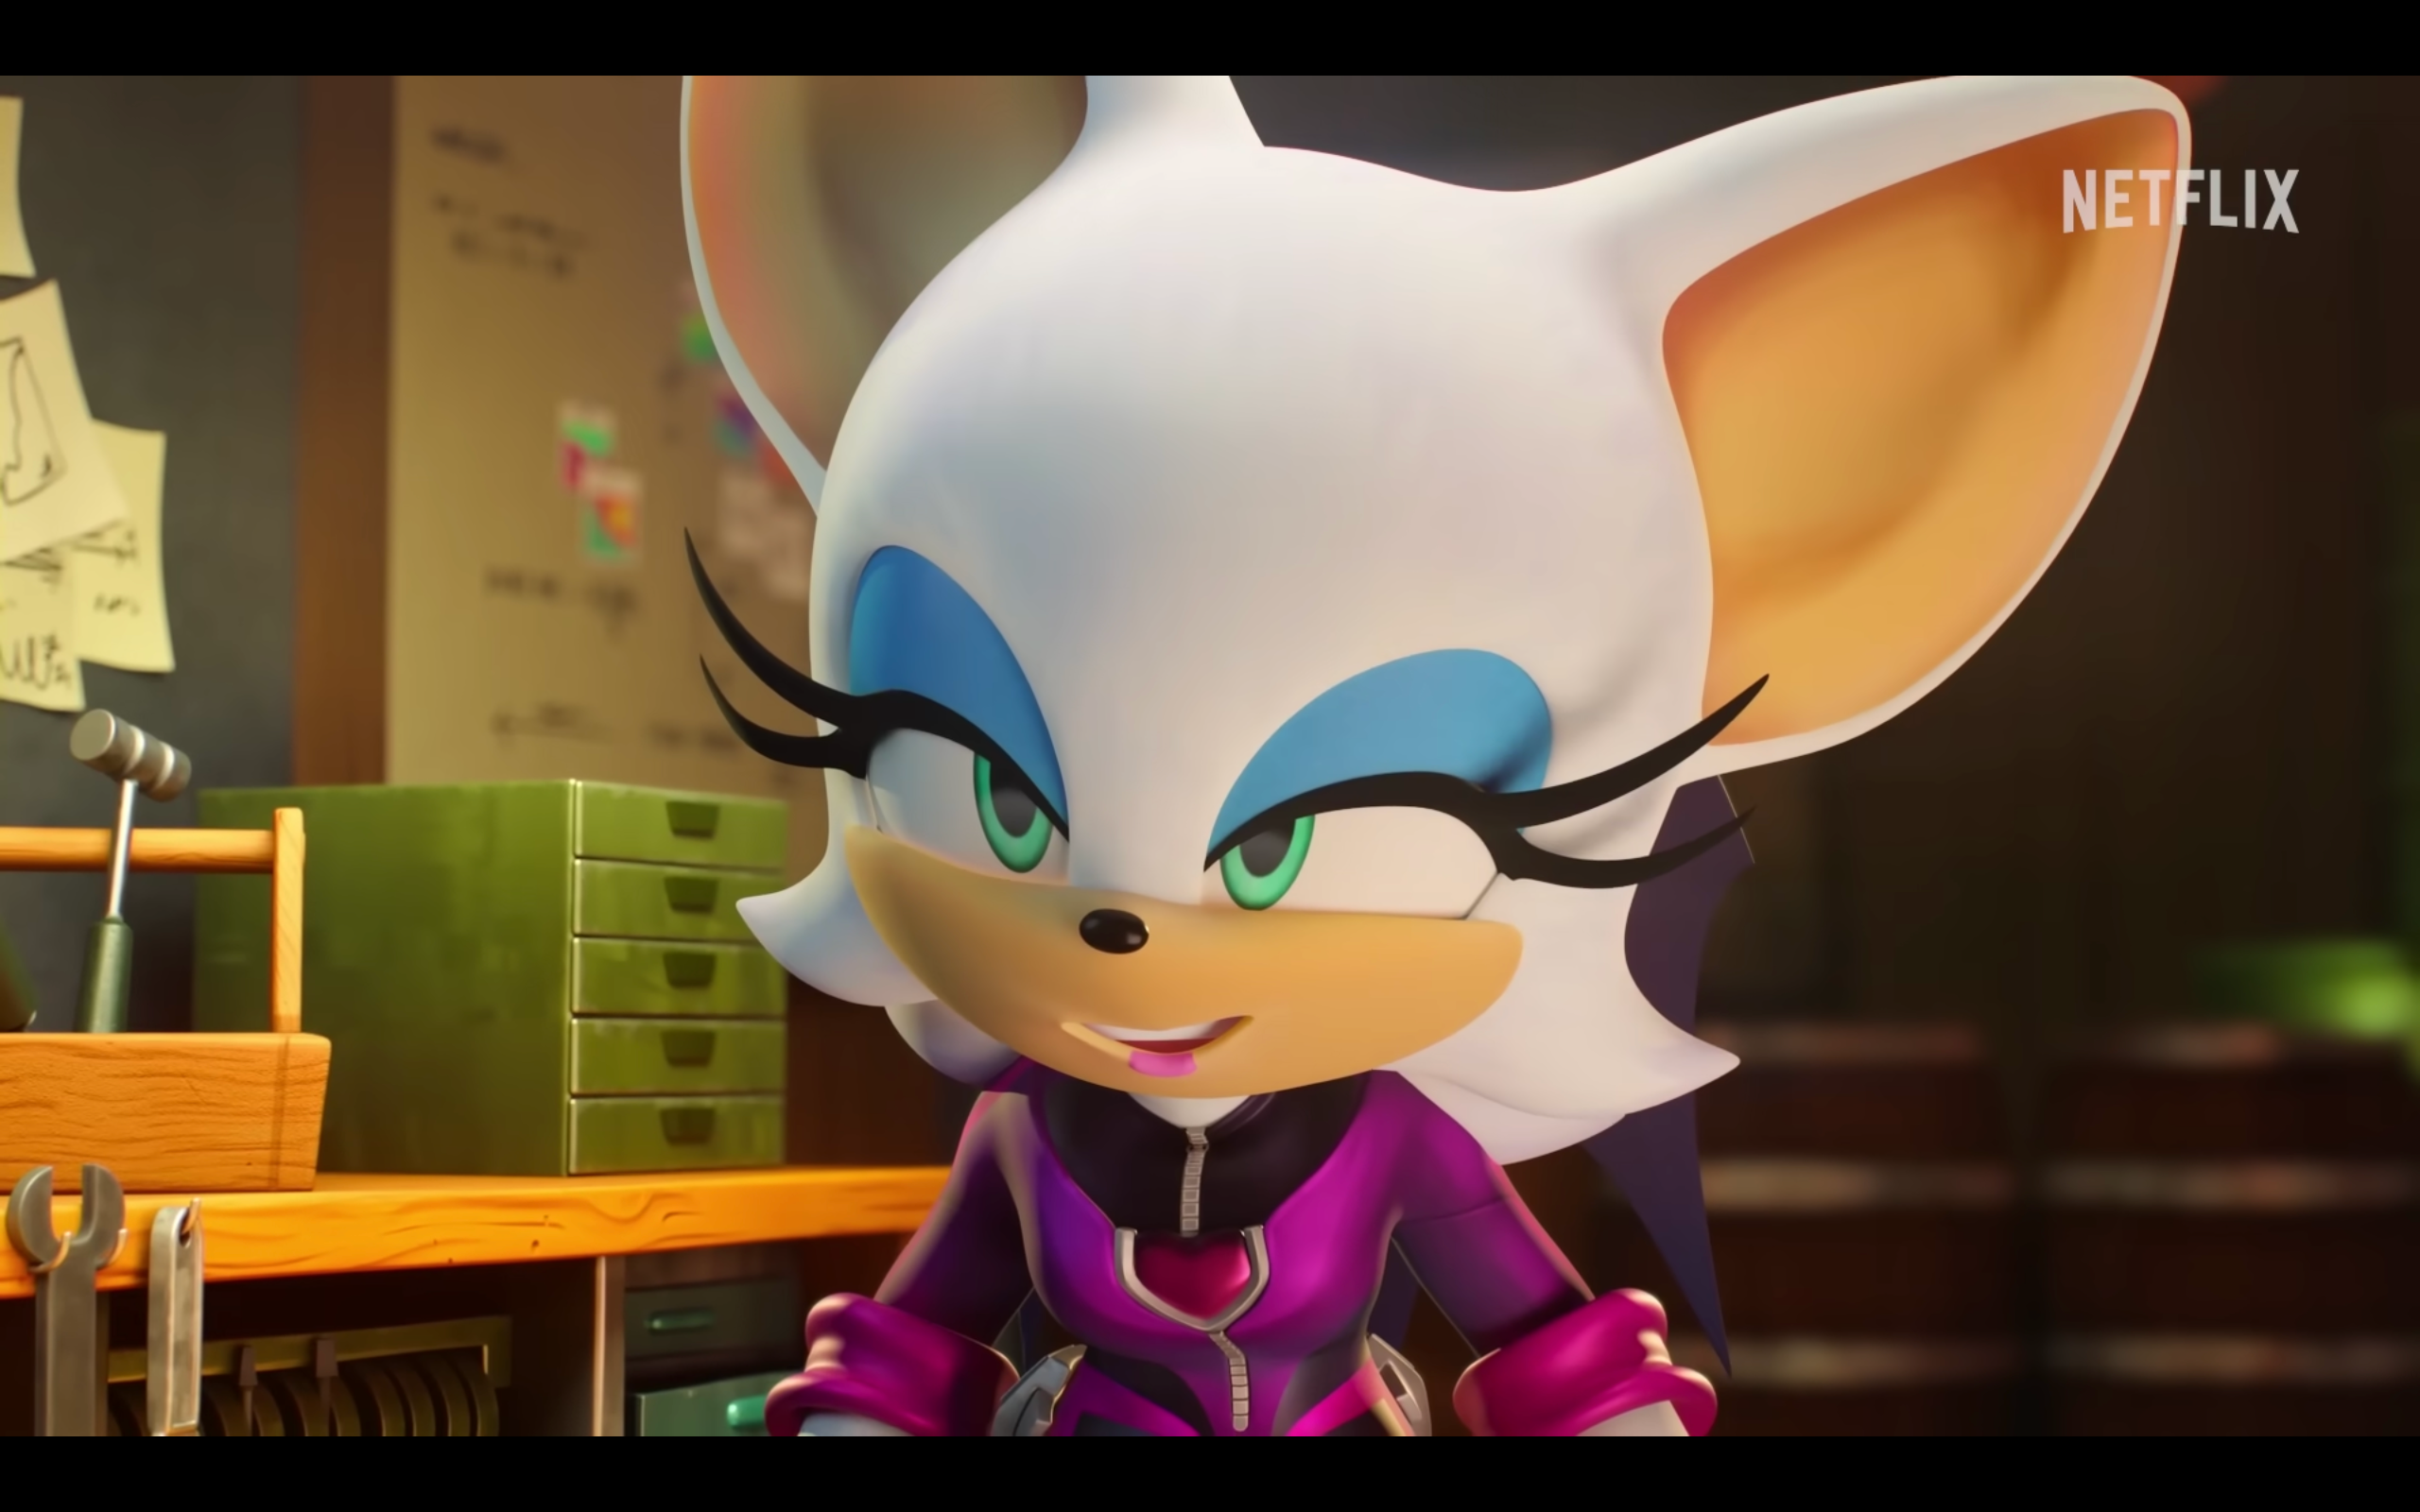 Sonic the Hedgehog (2020): Where to Watch & Stream Online